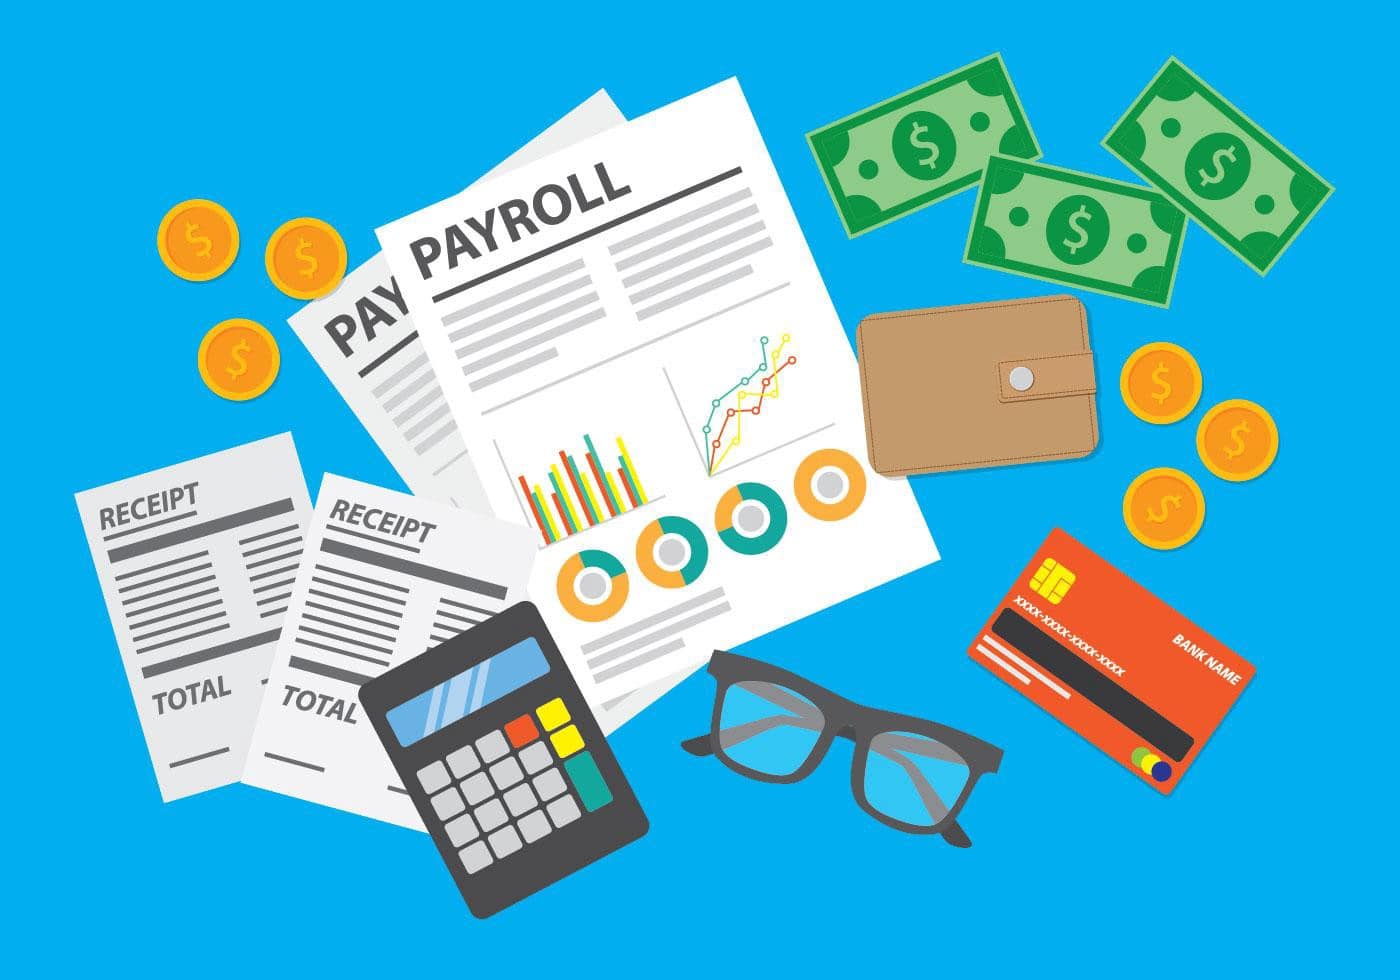 Payroll Management System and Types